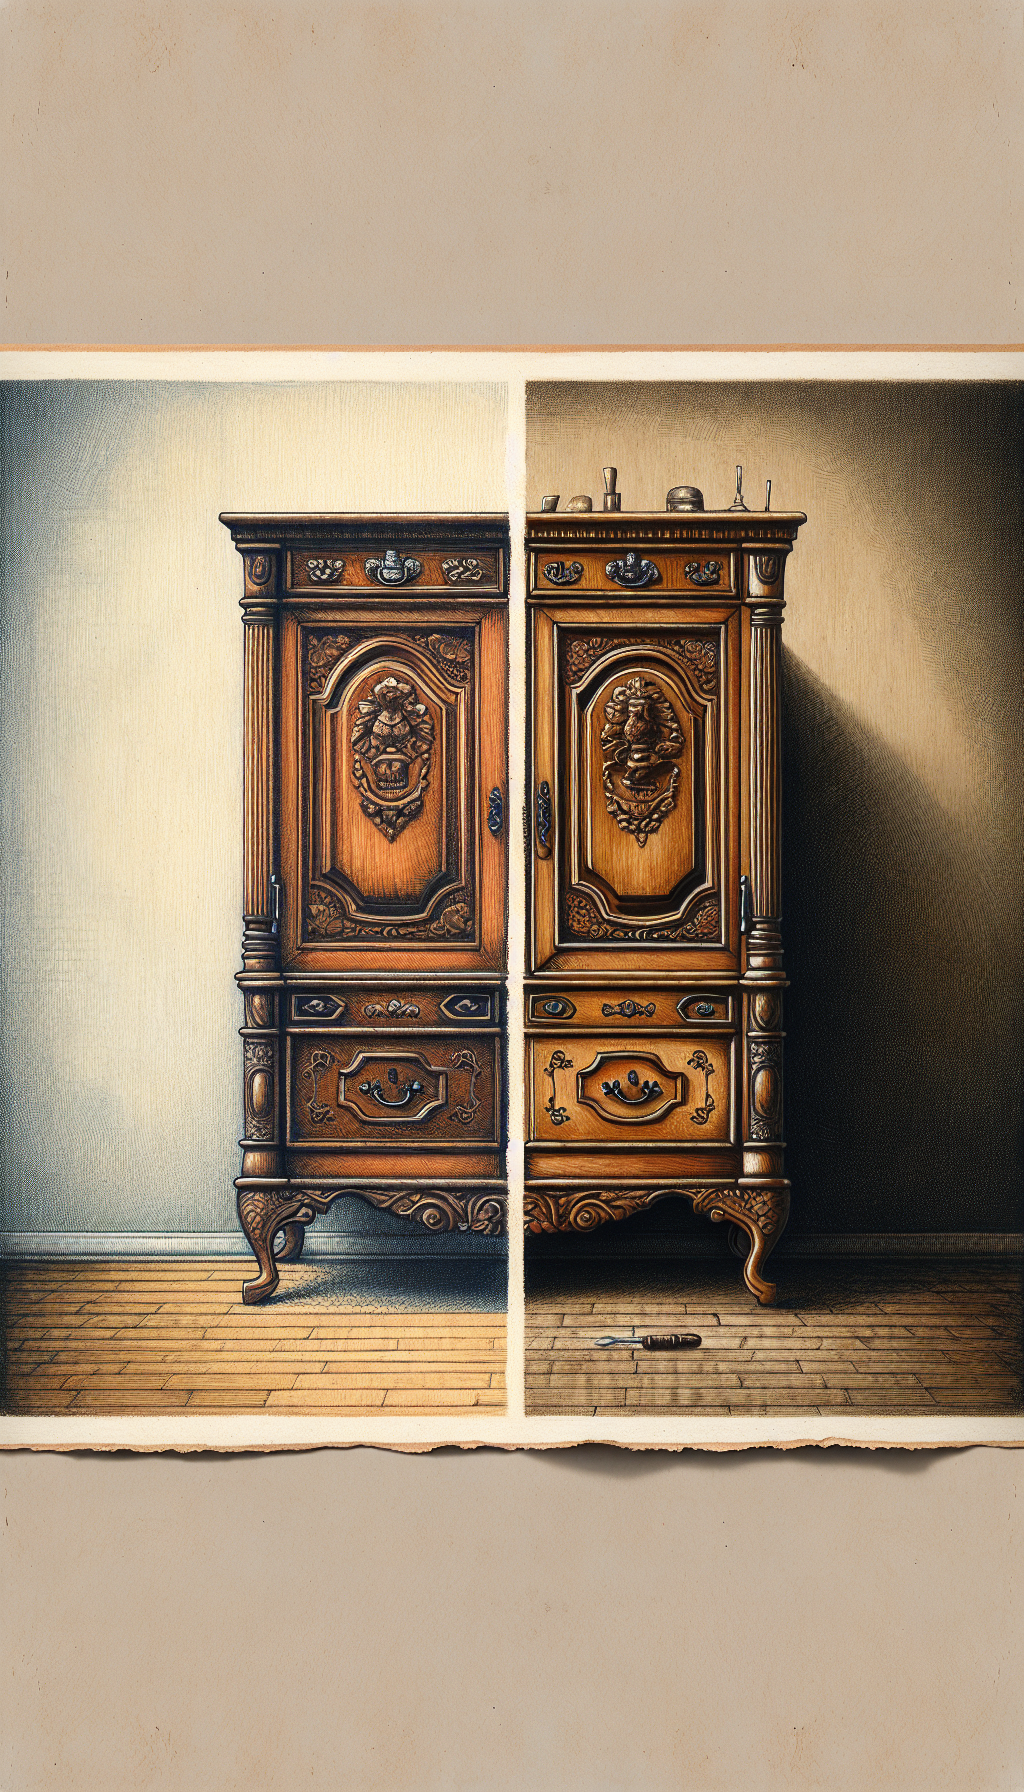 An illustration depicts an antique armoire under a magnifying glass, emphasizing fine details like wood grain, ornate carvings, and vintage hardware. Half is mint condition, the other half subtly deteriorated, showing scratches and a wobbly leg, visually splitting the armoire's image to represent the impact of craftsmanship and condition on its value. Different styles, from realistic to impressionistic, blend across the divide.